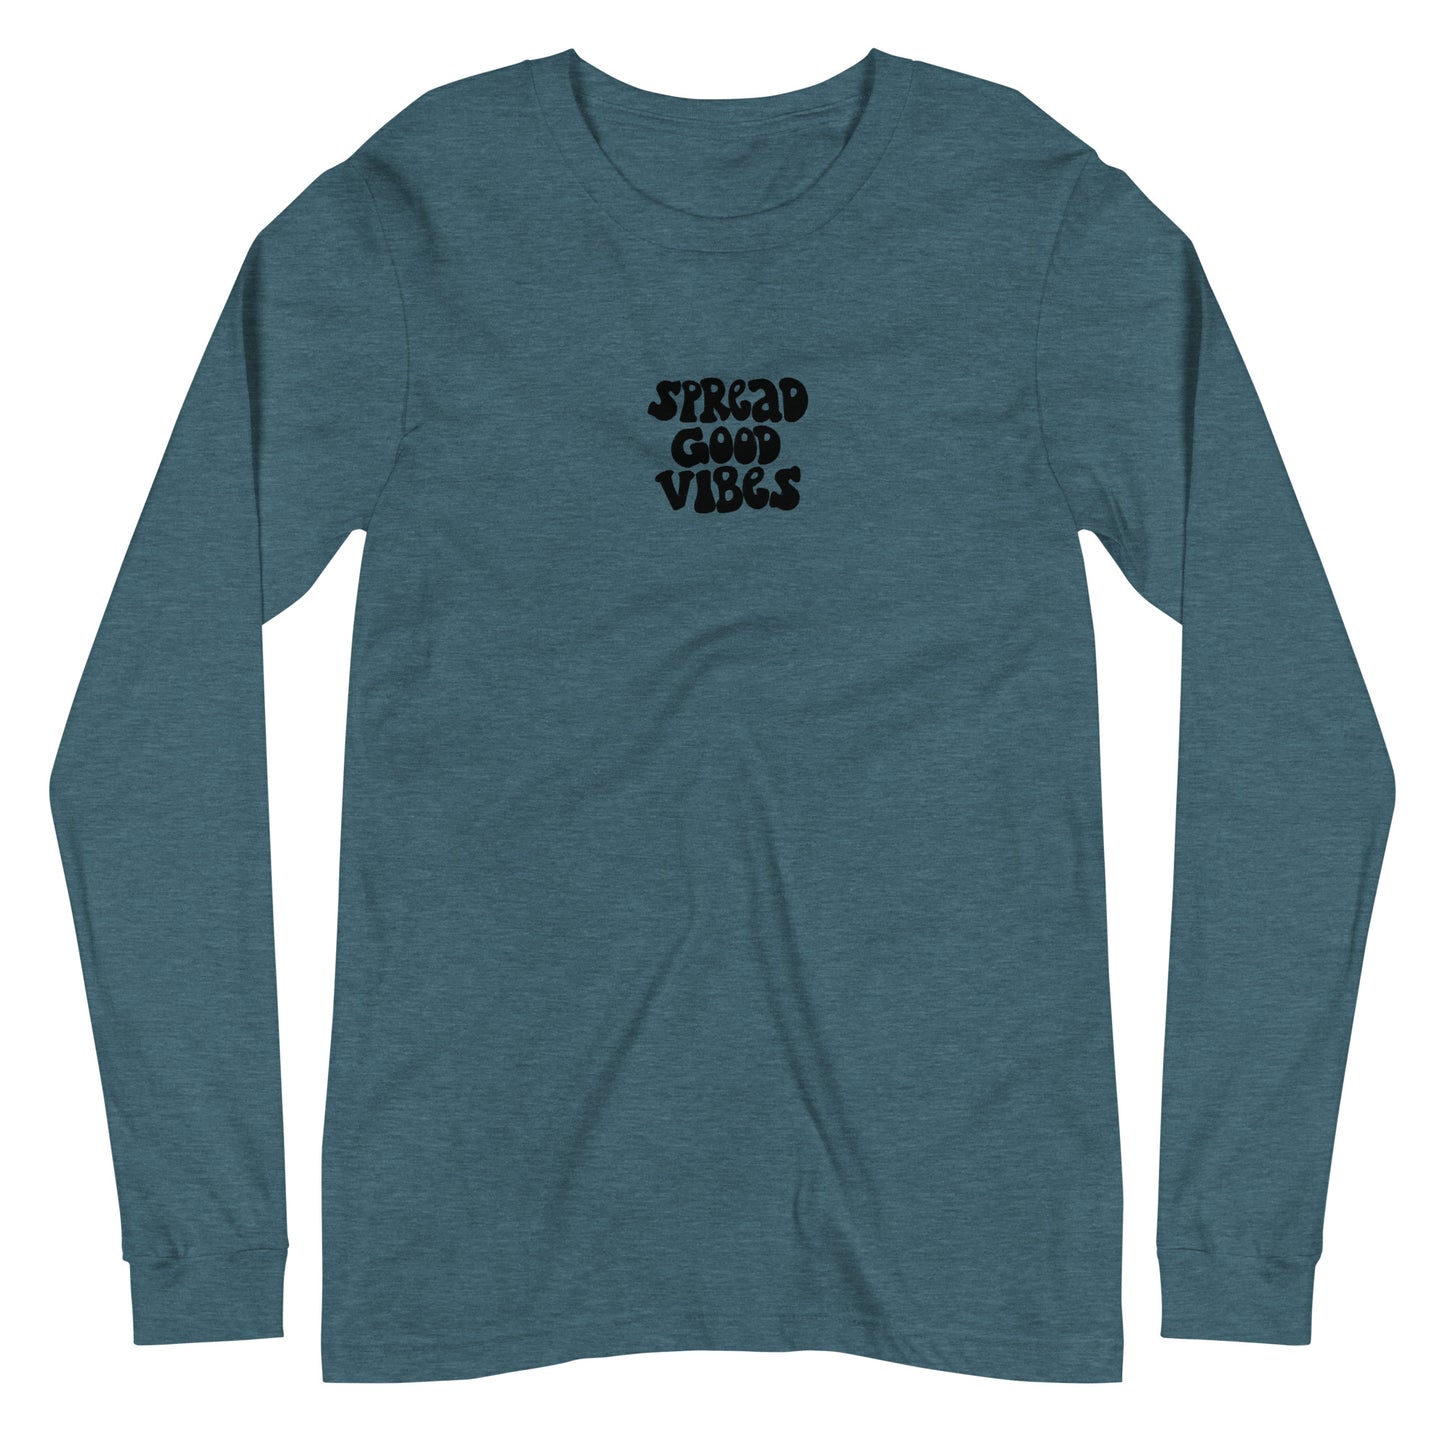 spread good vibes embroidered long sleeve tee